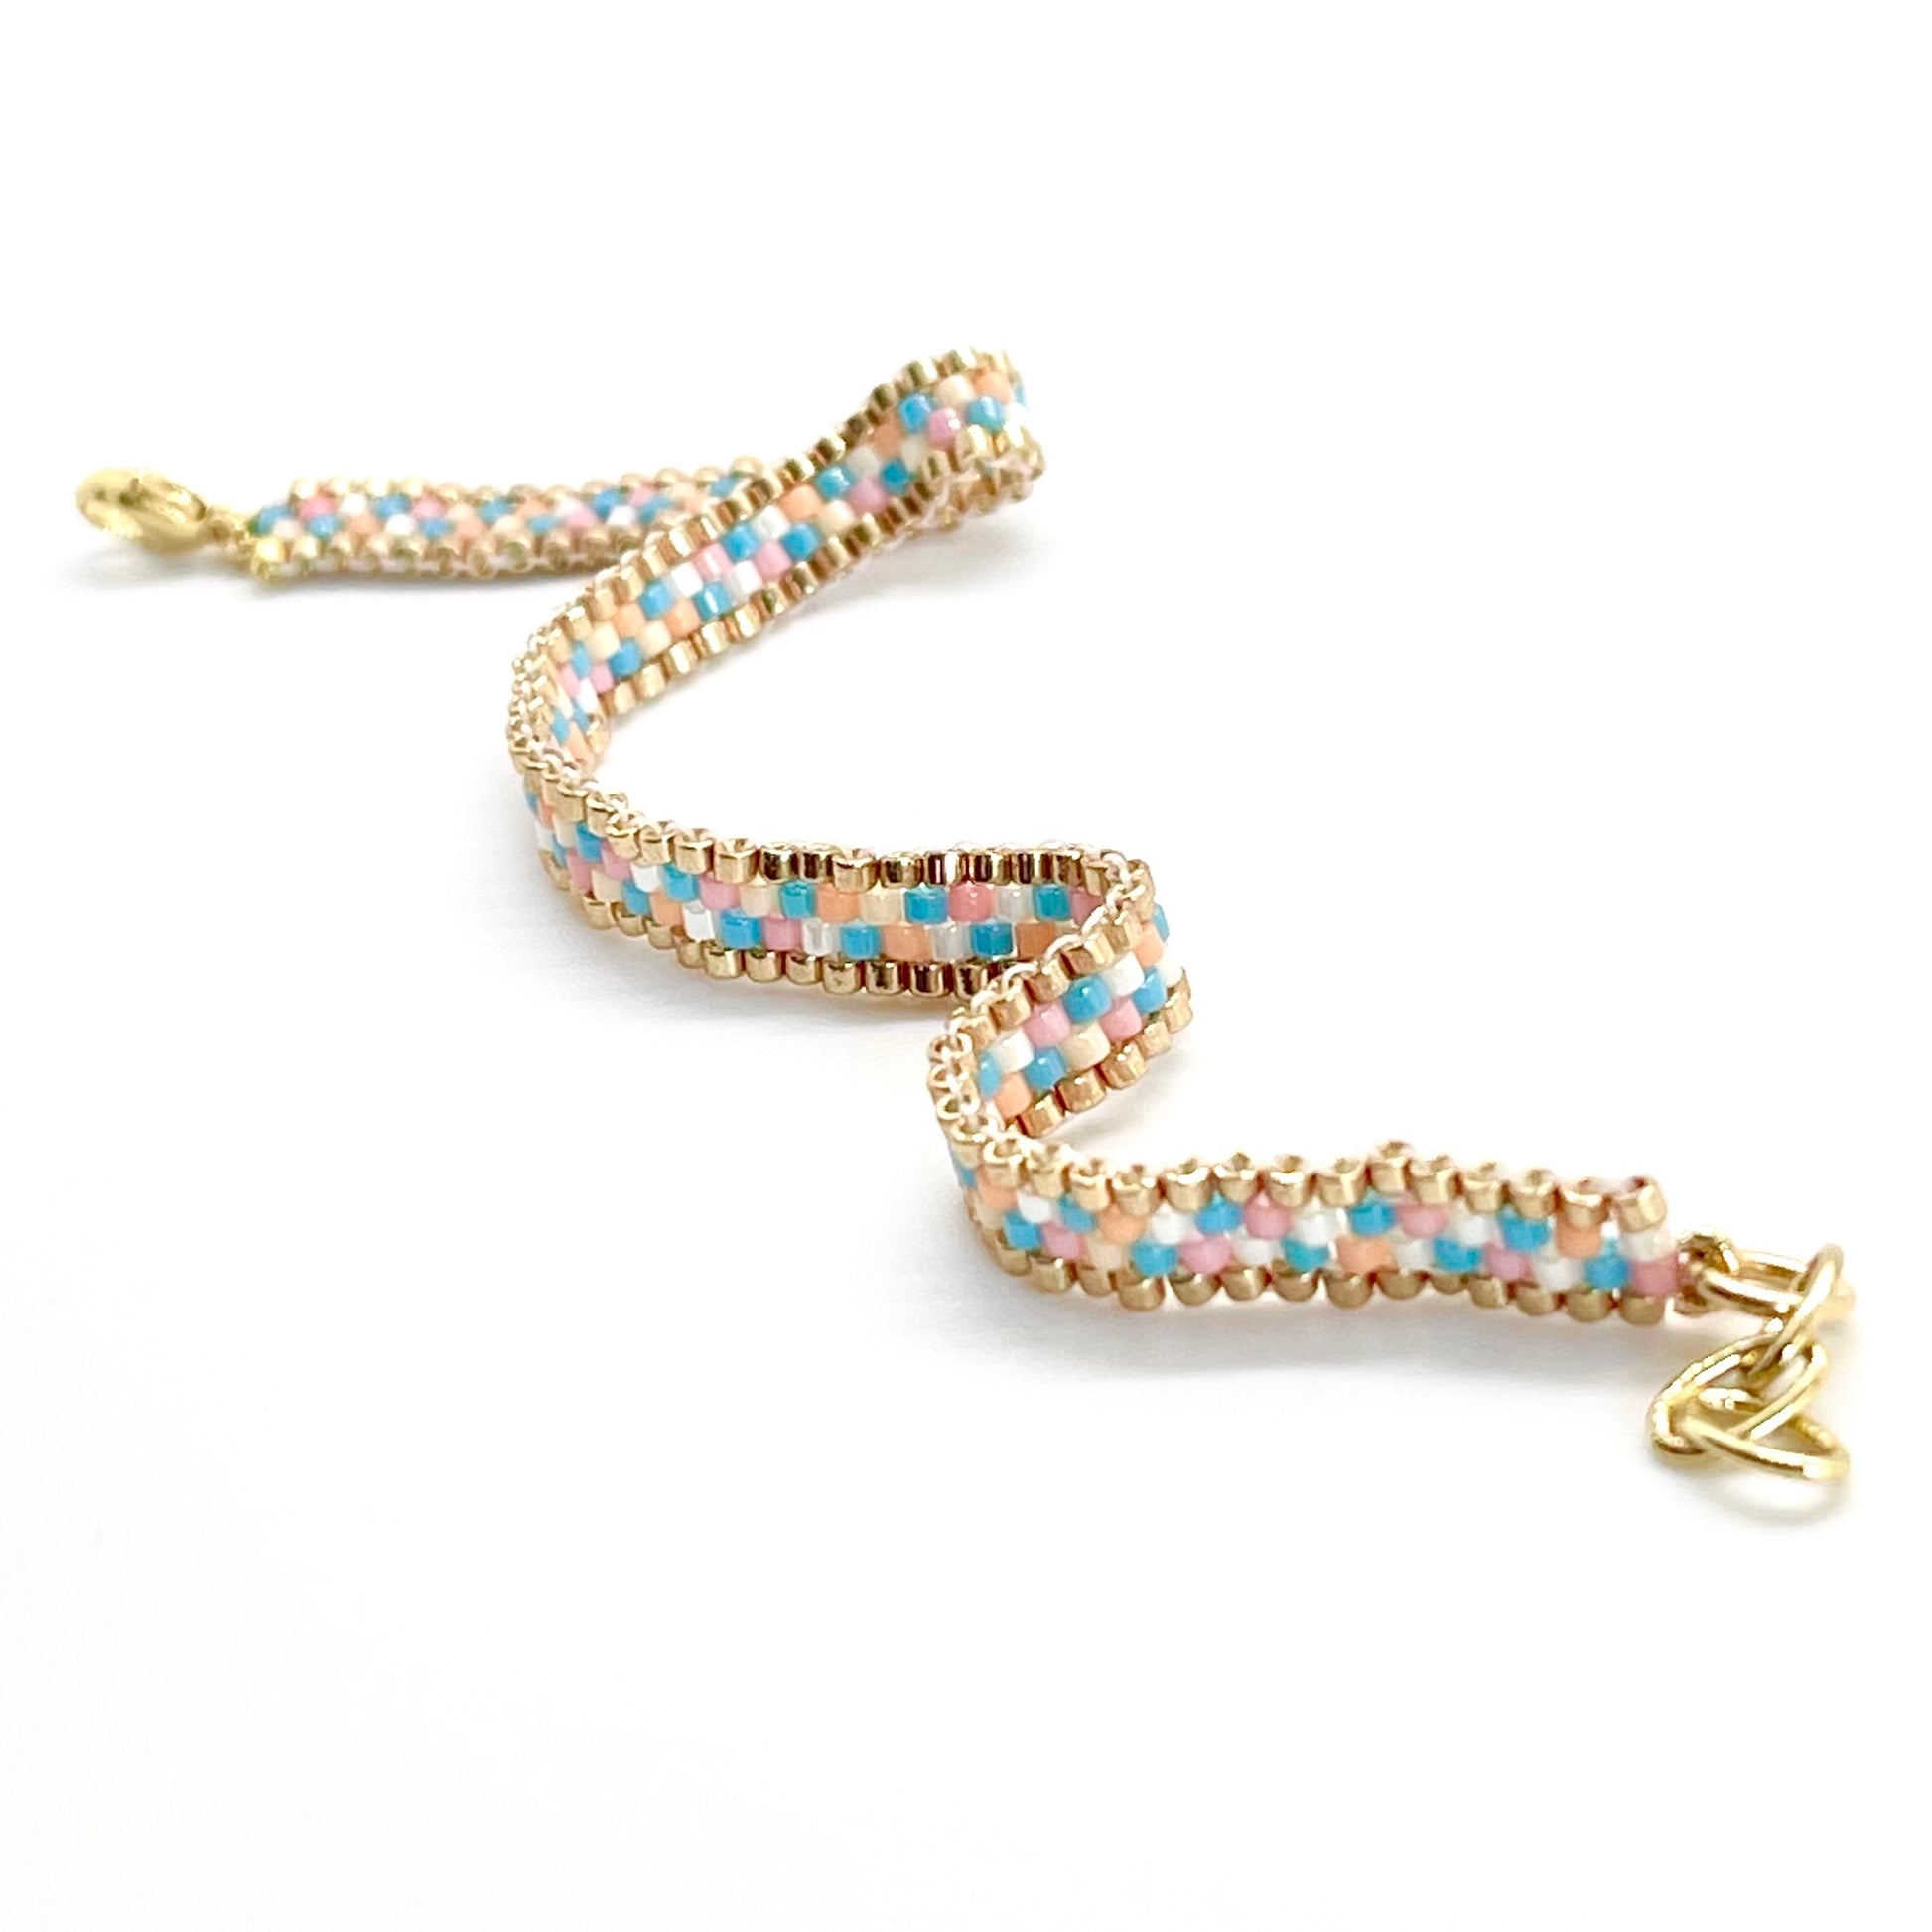 Checkered dots beaded woven thin pastel bracelet cuff. Handmade in NYC.